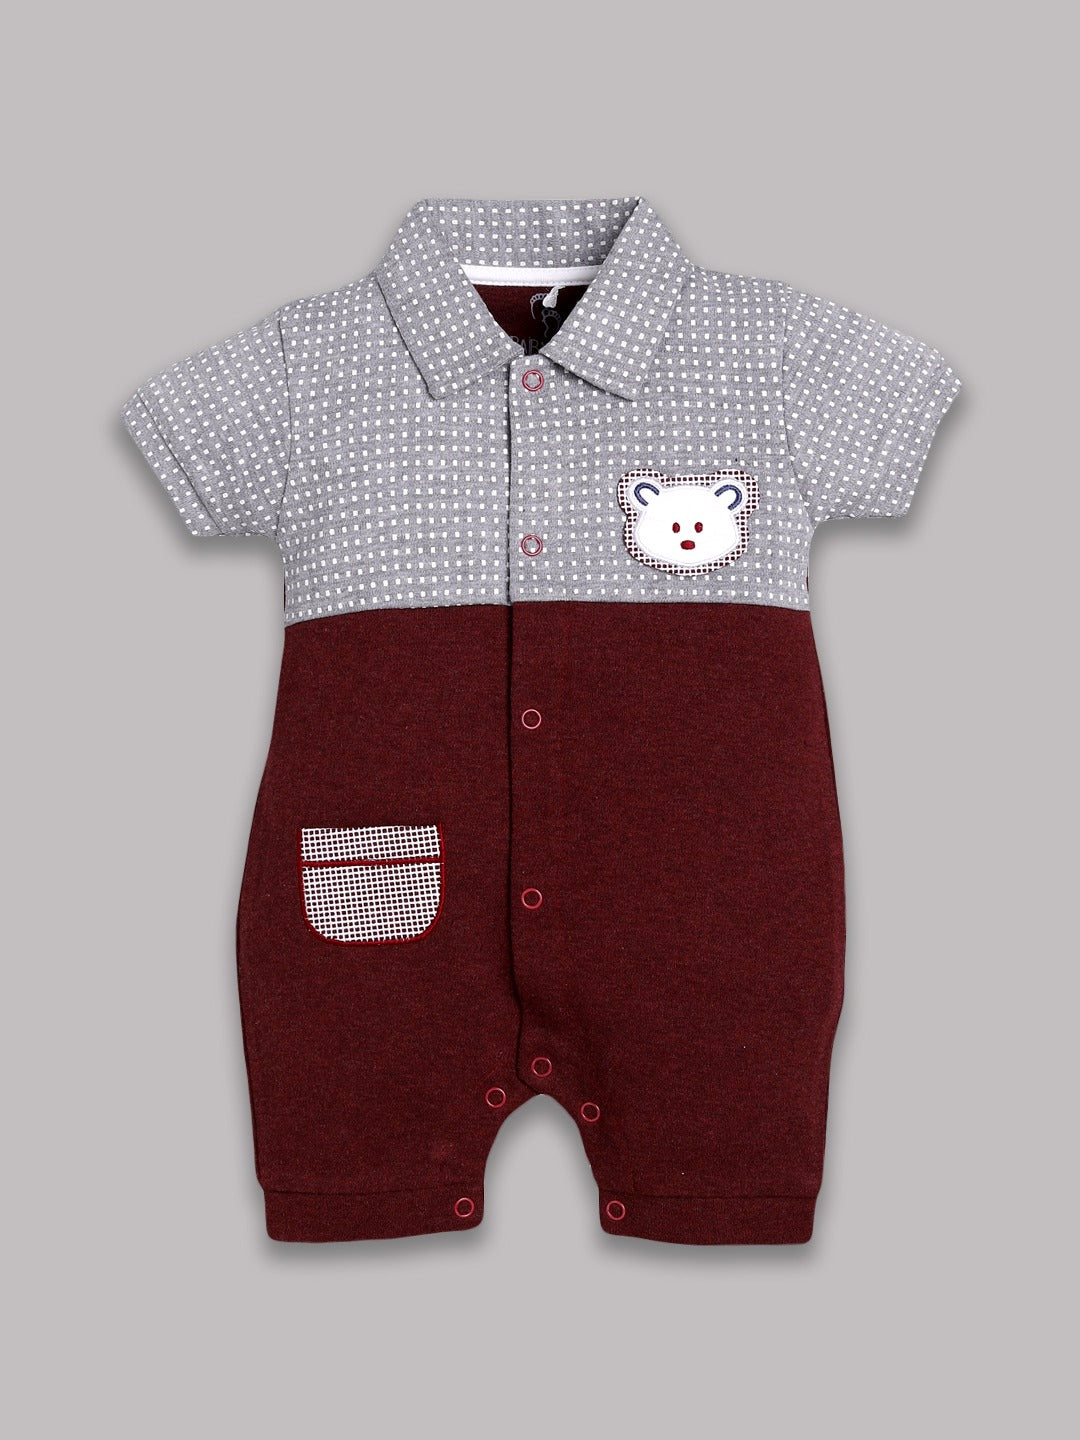 Half Sleeves Round neck Romper for Baby Boys 100% Pure Cotton-MAROON